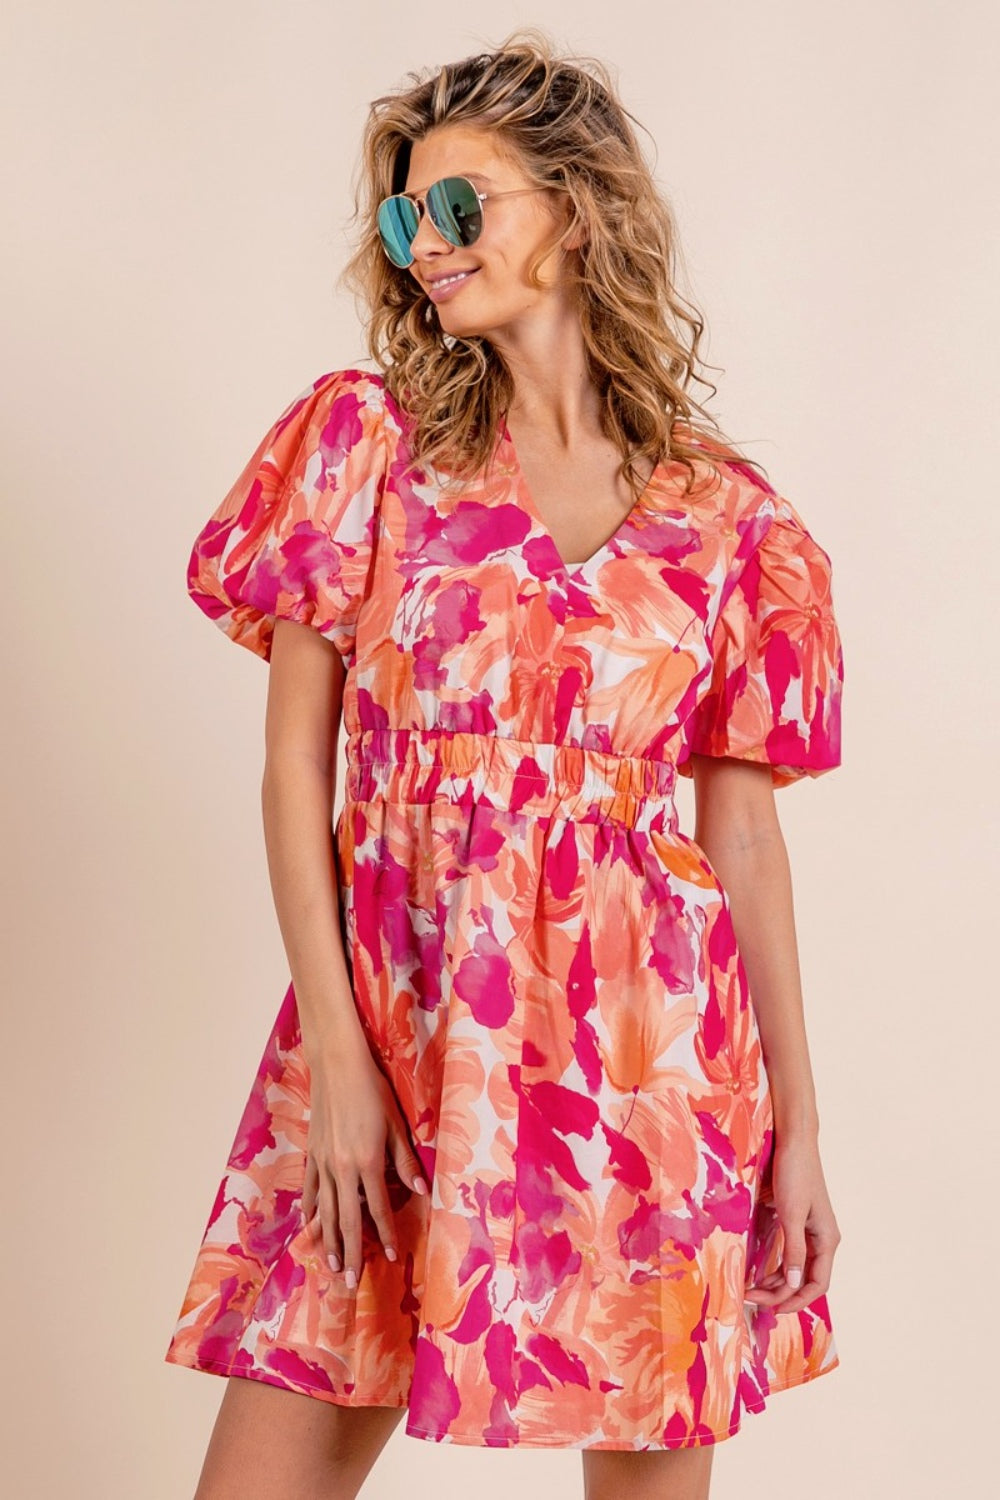 BiBi Floral V-Neck Mini Dress with Puff Sleeves - Summer Beach Wedding Guest Outfit for Women